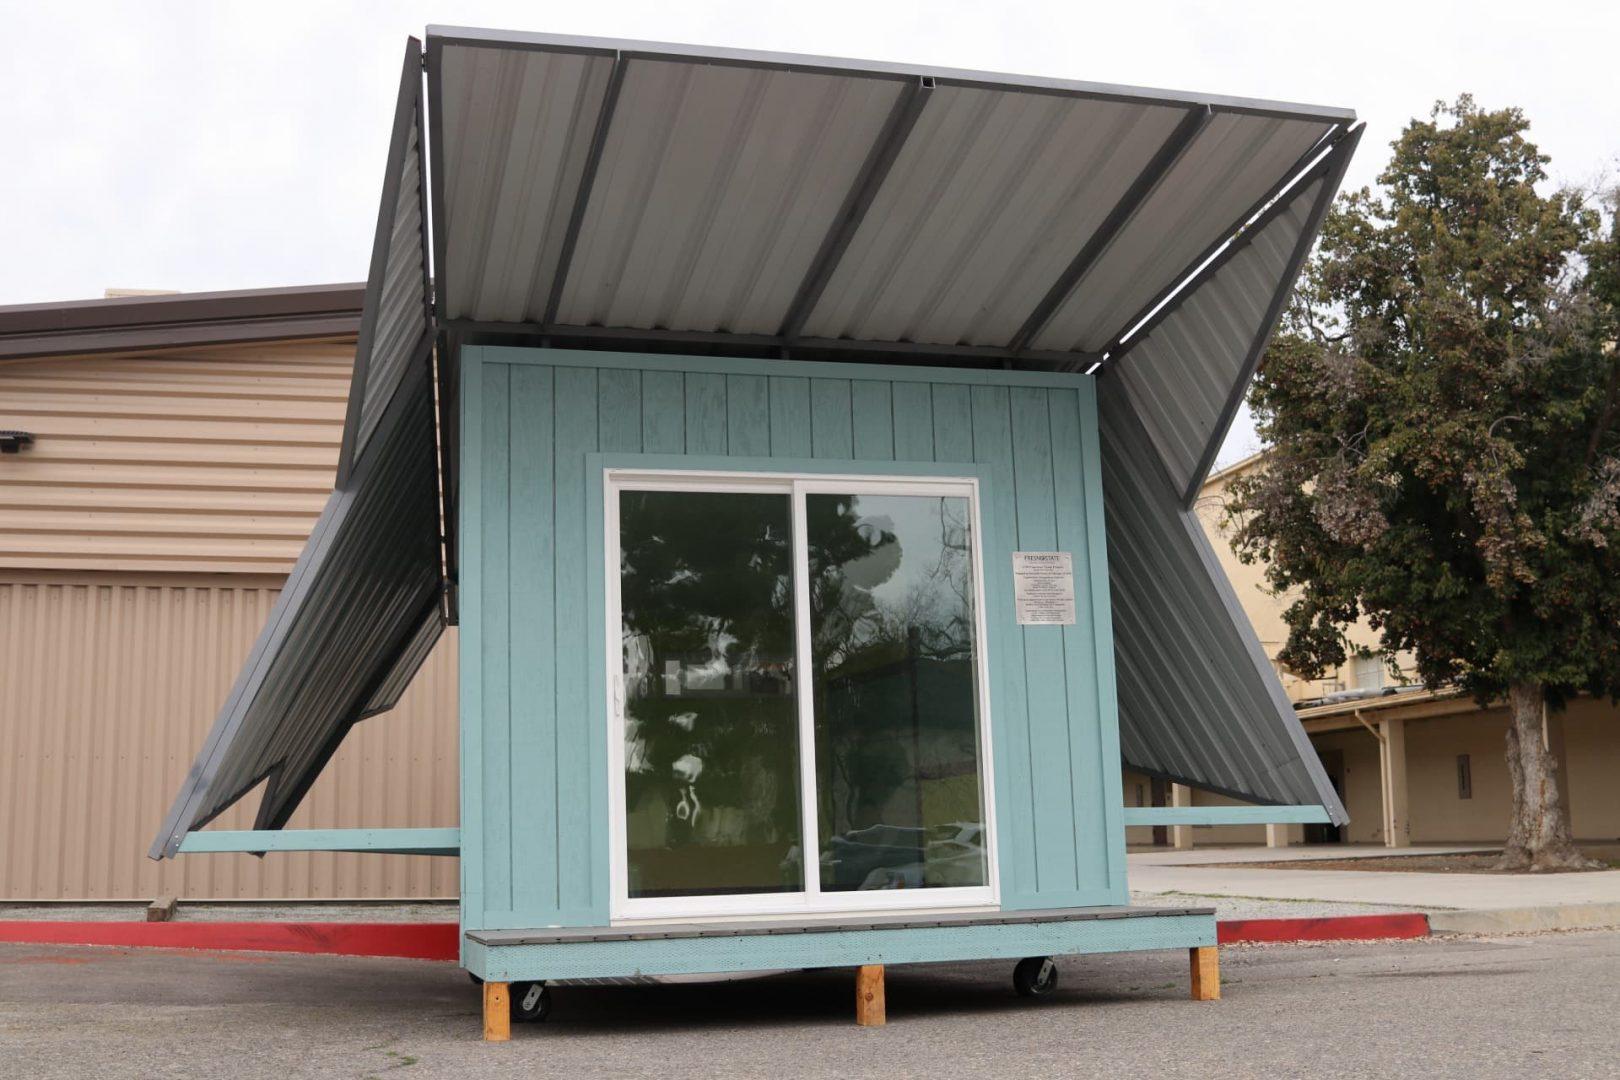 A shelter constructed by Fresno State engineering and interior design students in collaboration with local construction firms. The shelter will be donated to the Poverello House charity foundation. (Larry Valenzuela/ The Collegian)